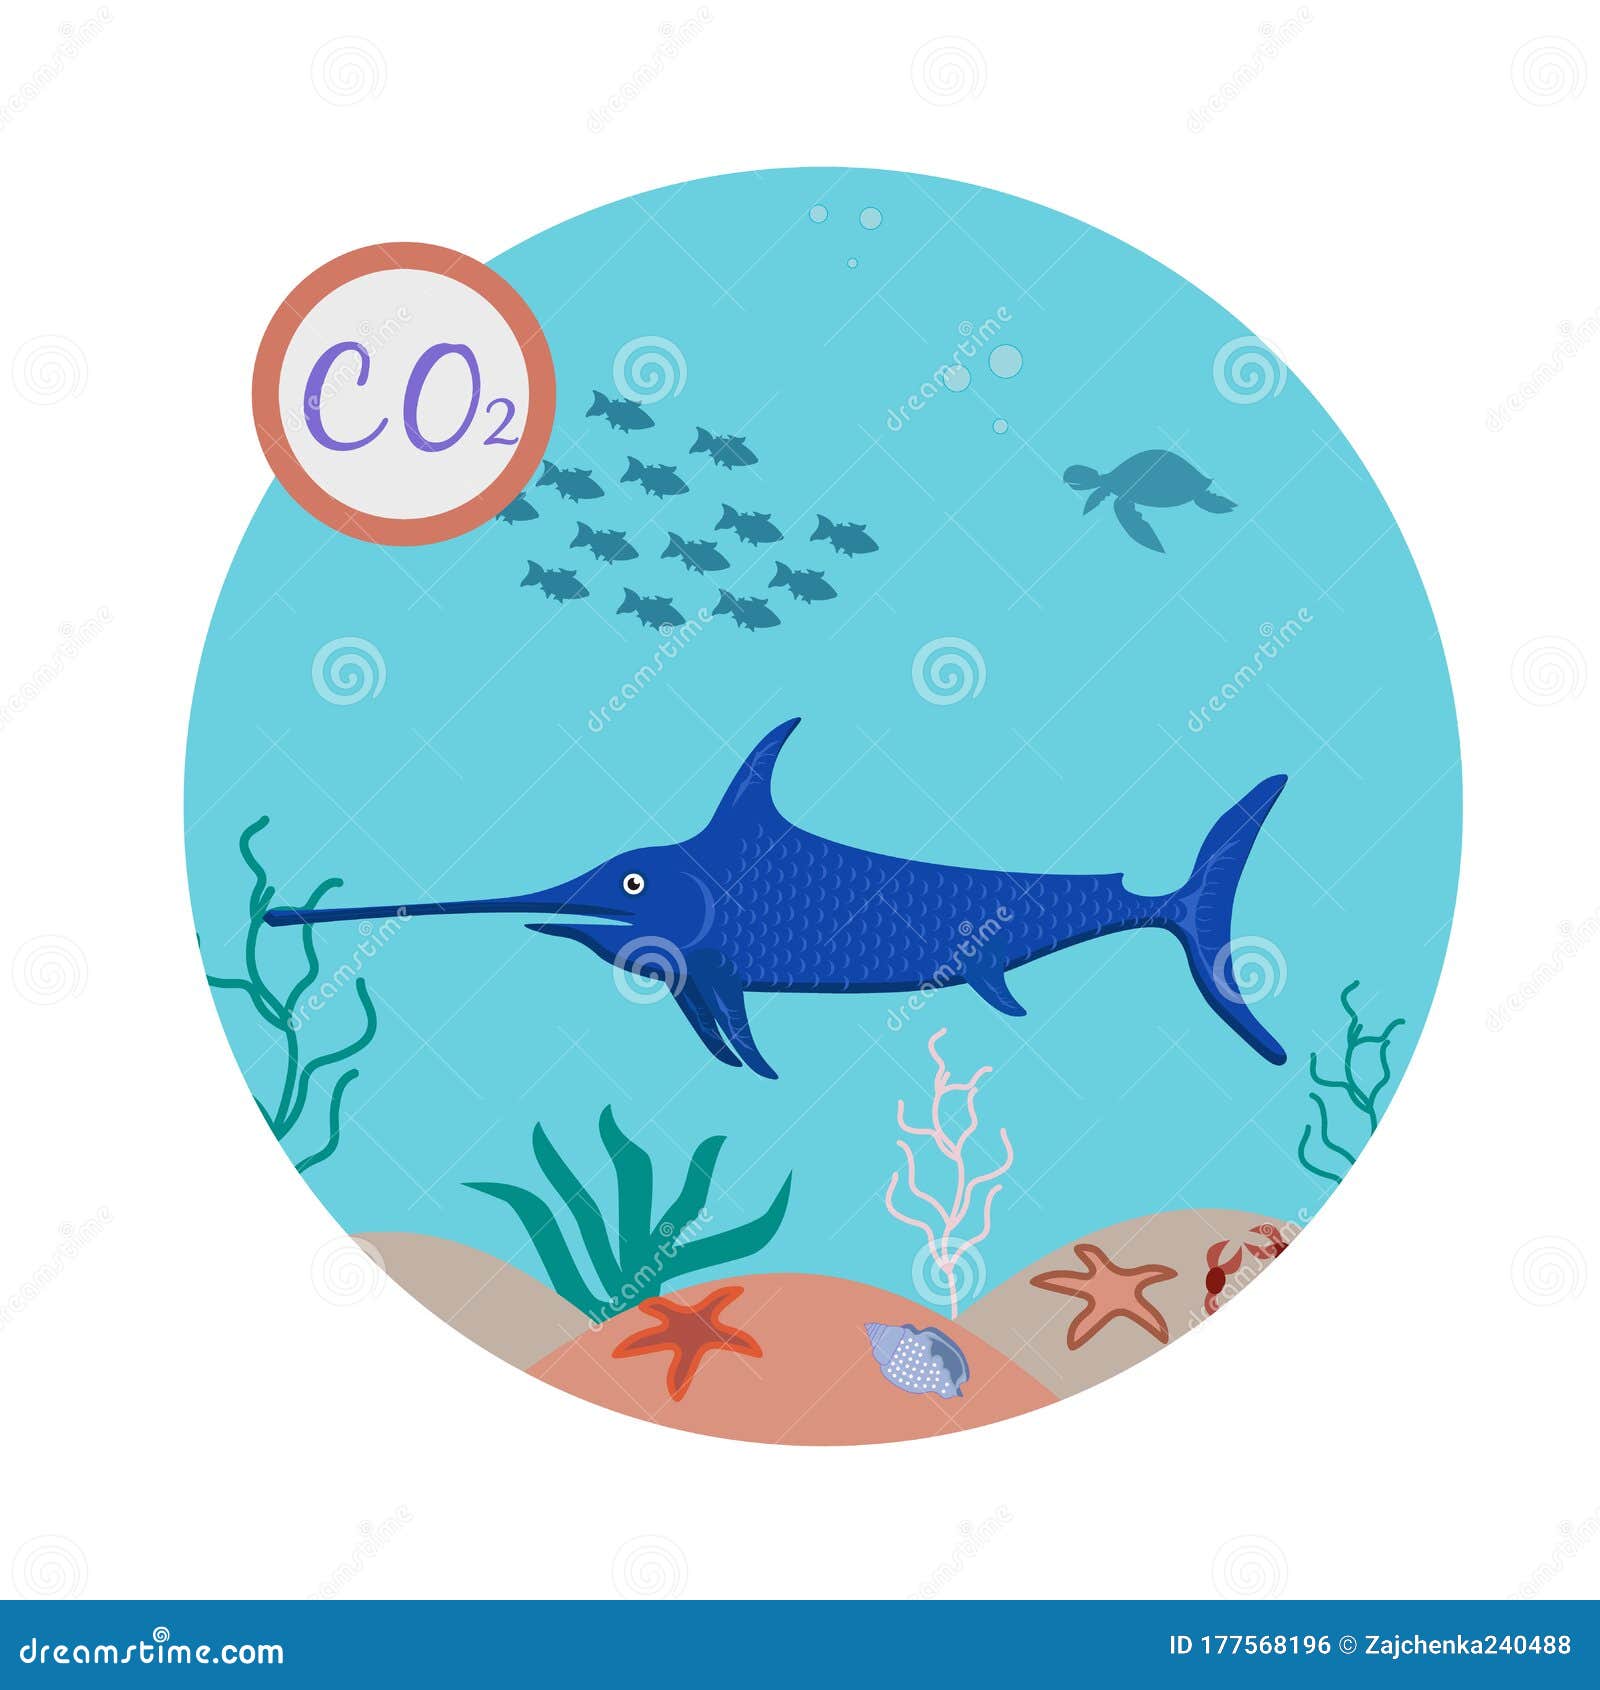 The Extinction of Rare Species of Fish and Marine Animals, the Problem of  Urbanization. Biological Impact Stock Illustration - Illustration of  background, concept: 177568196